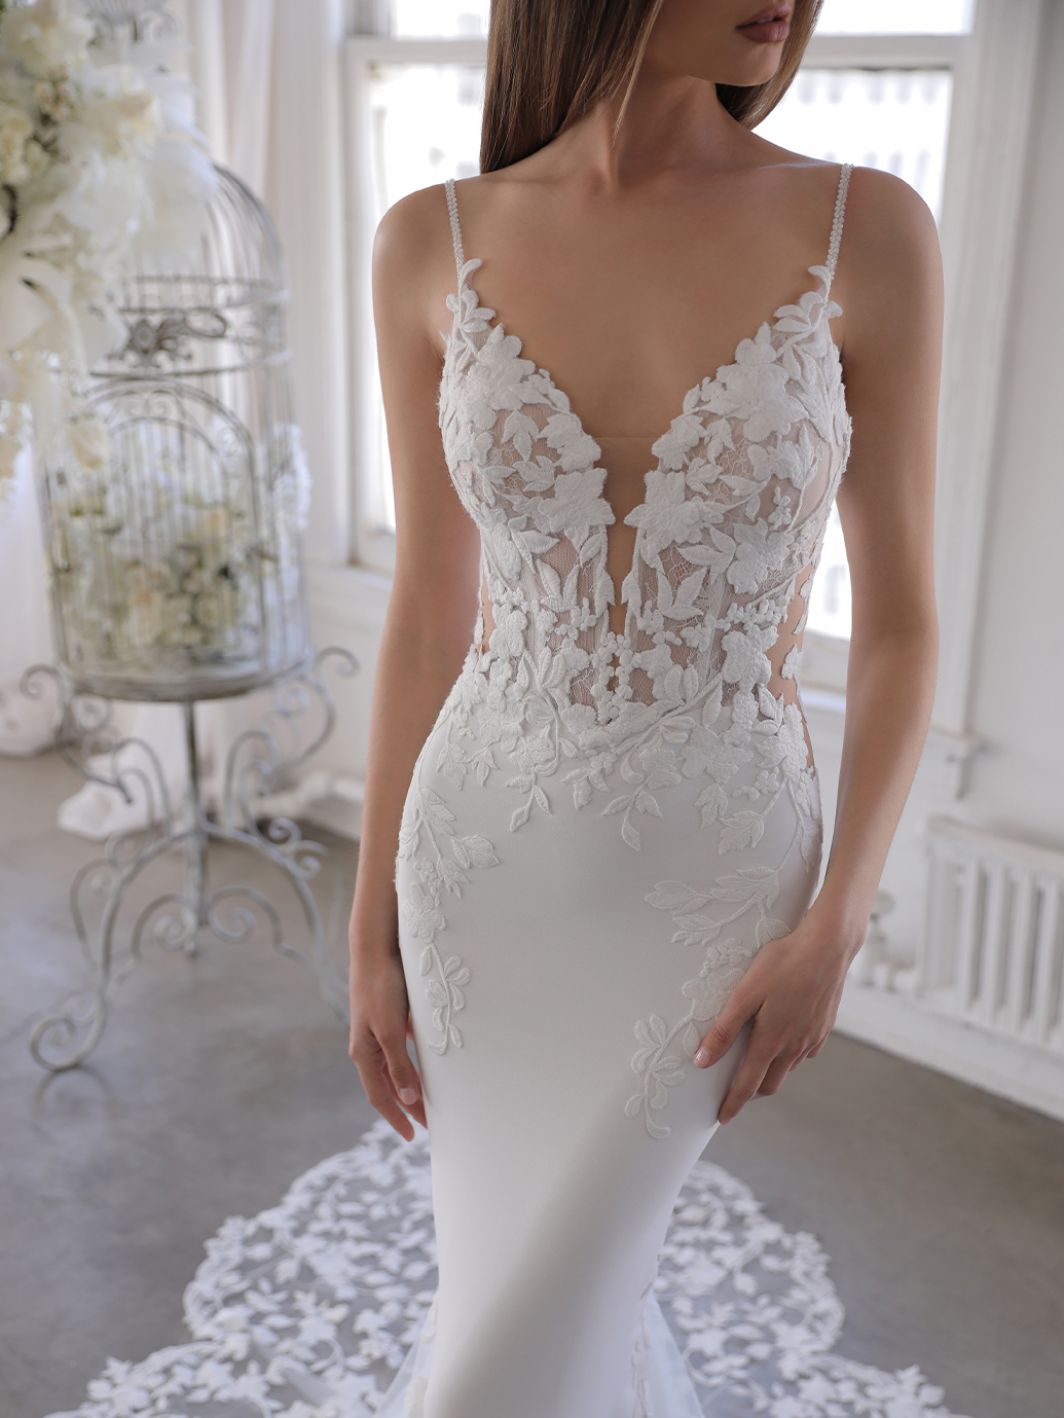 Lace Wedding Dress with Thin Straps